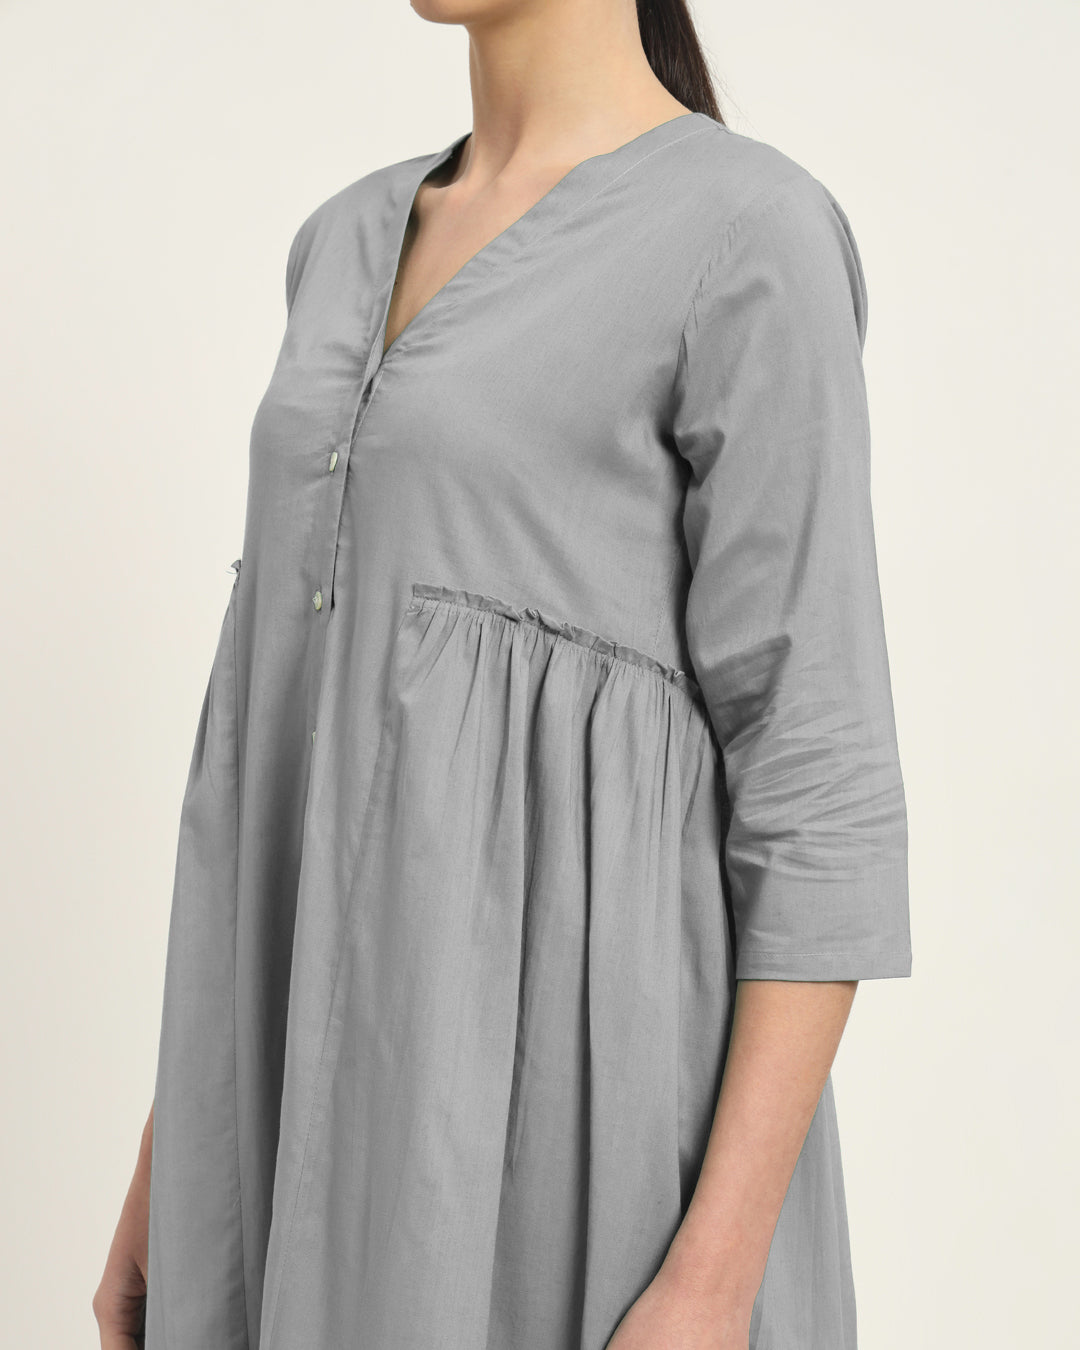 Iced Grey Whimsy Affair Buttoned Solid Kurta (Without Bottoms)